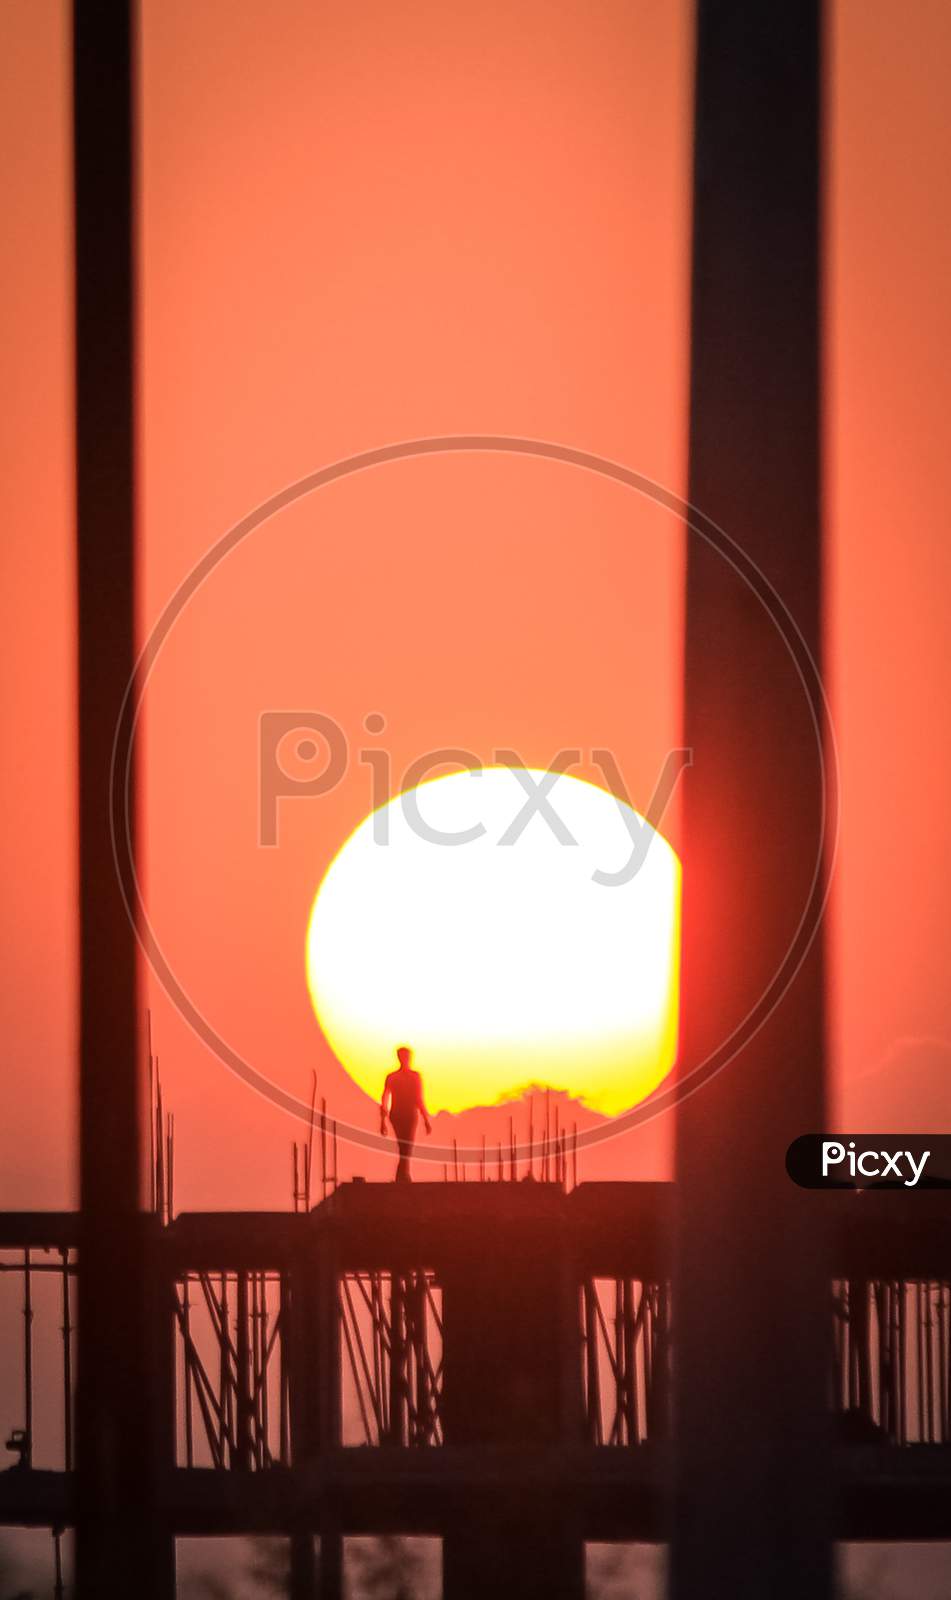 The beautiful sun and the man at the construction site , gives us a beautiful story of the sunset.